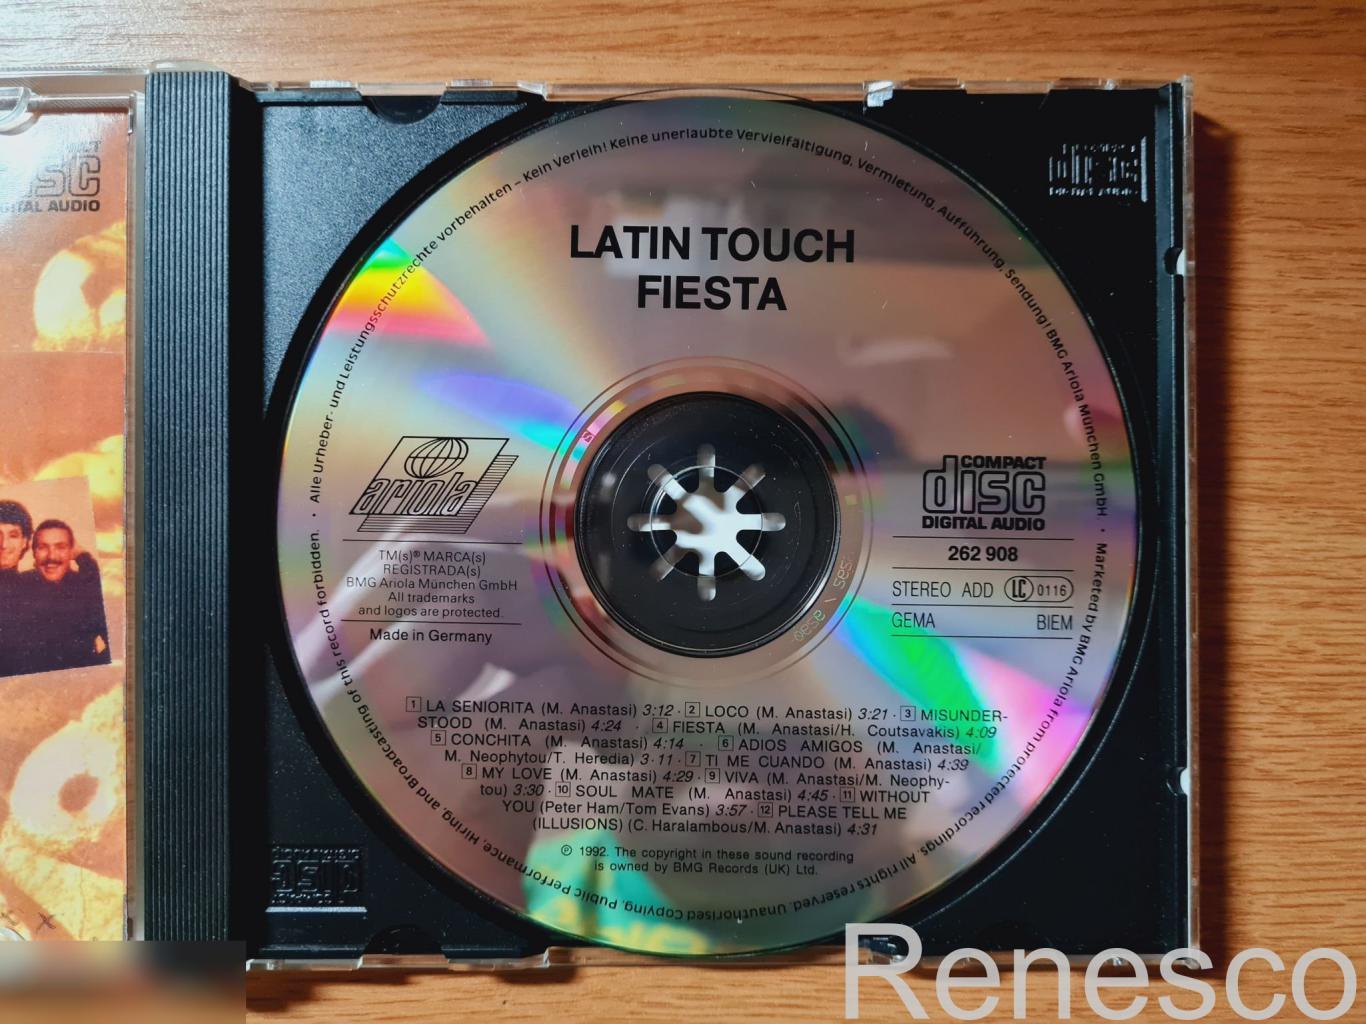 The Latin Touch – Fiesta (Germany) (1992) 4